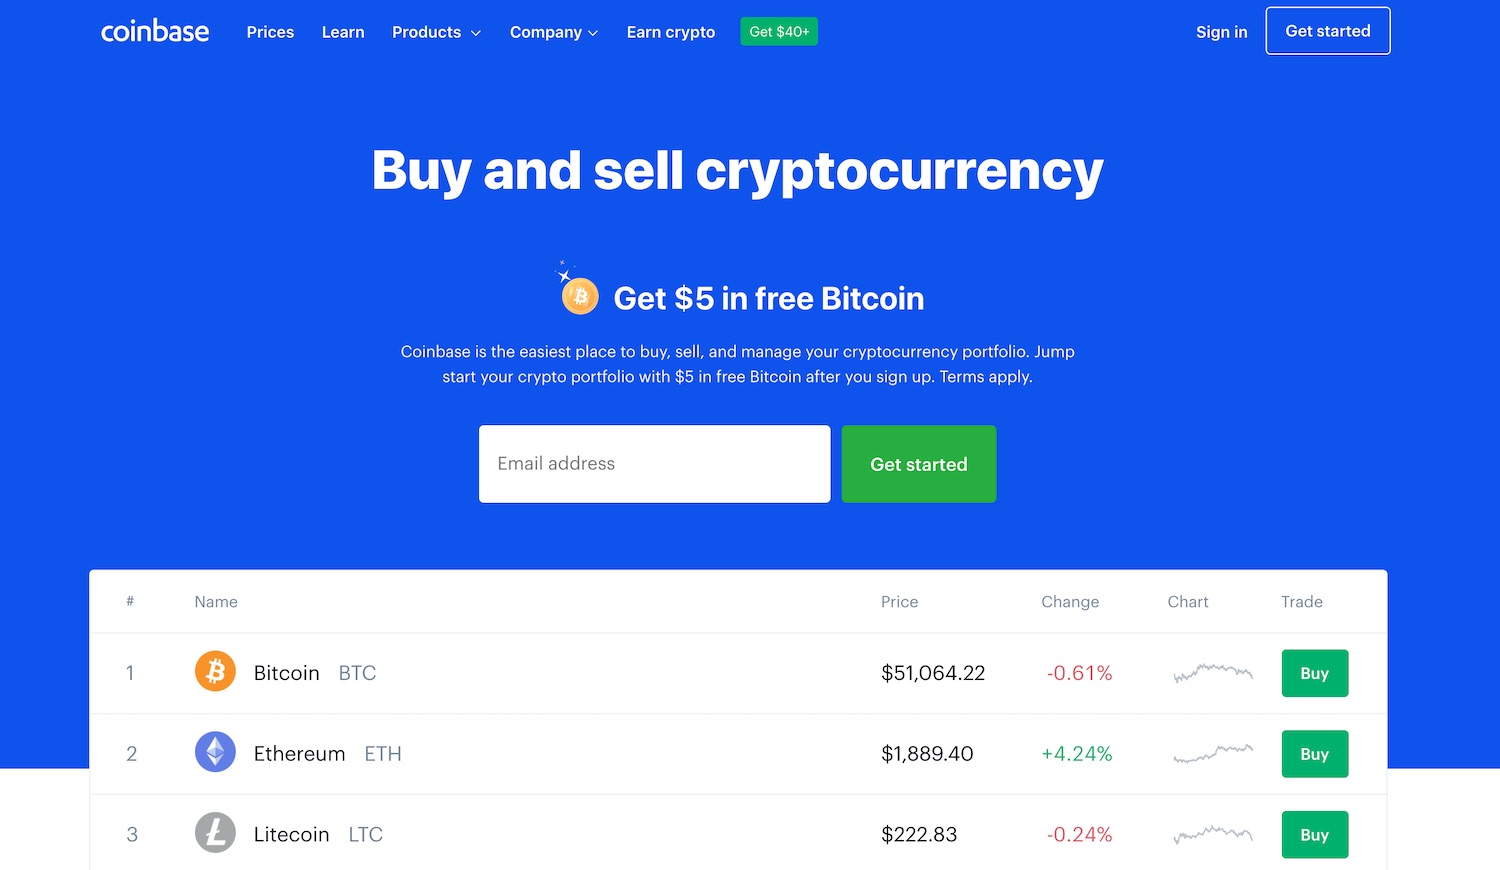 Coinbase Review 2021 UPDATED: Fees, Features, Pros and Cons